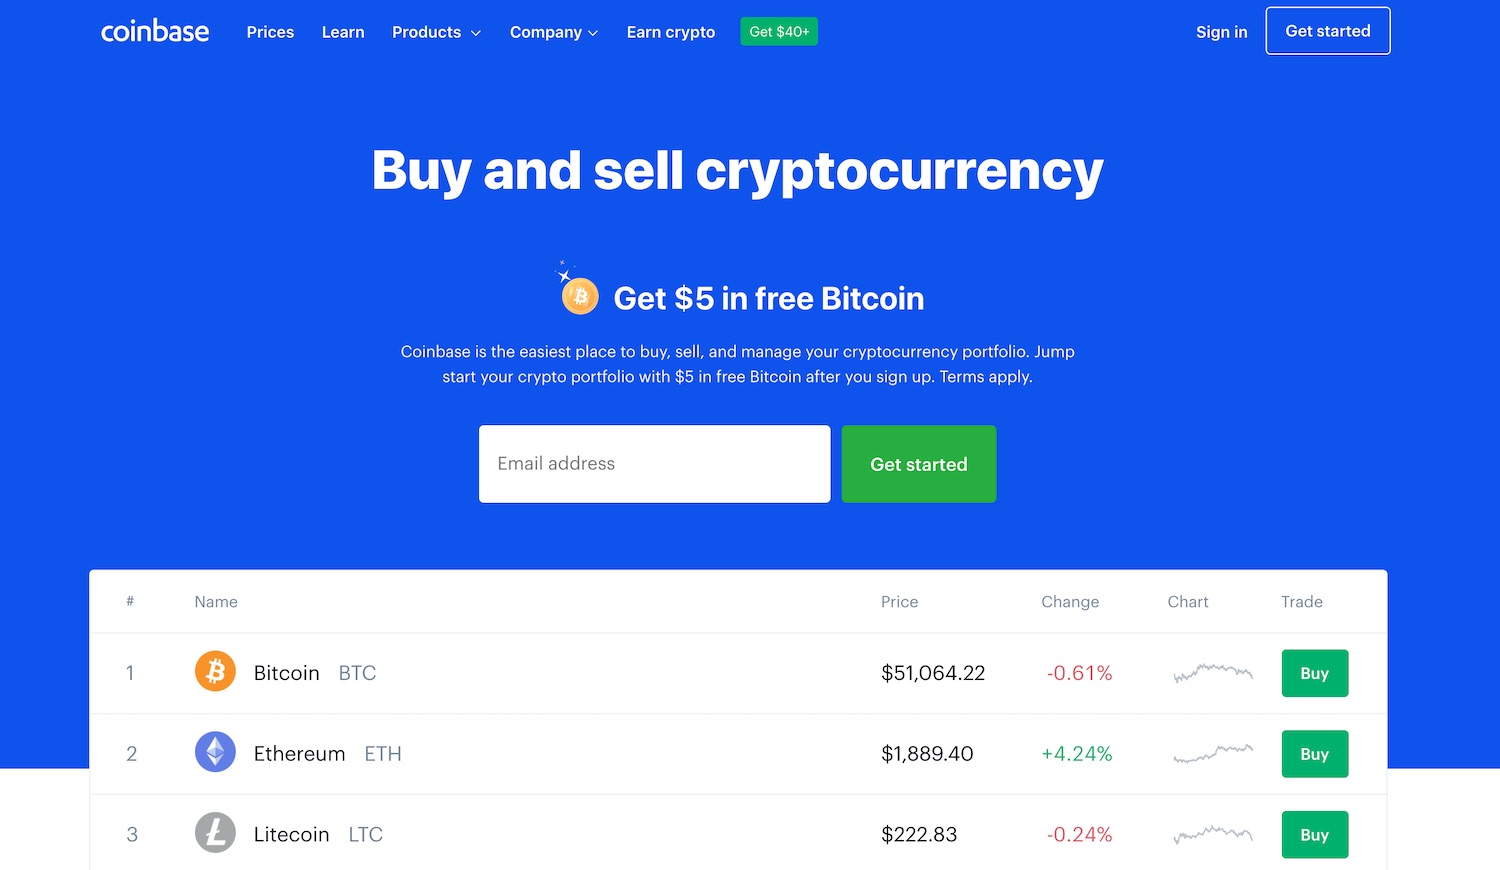 Coinbase Review 2021 UPDATED: Fees, Features, Pros and Cons